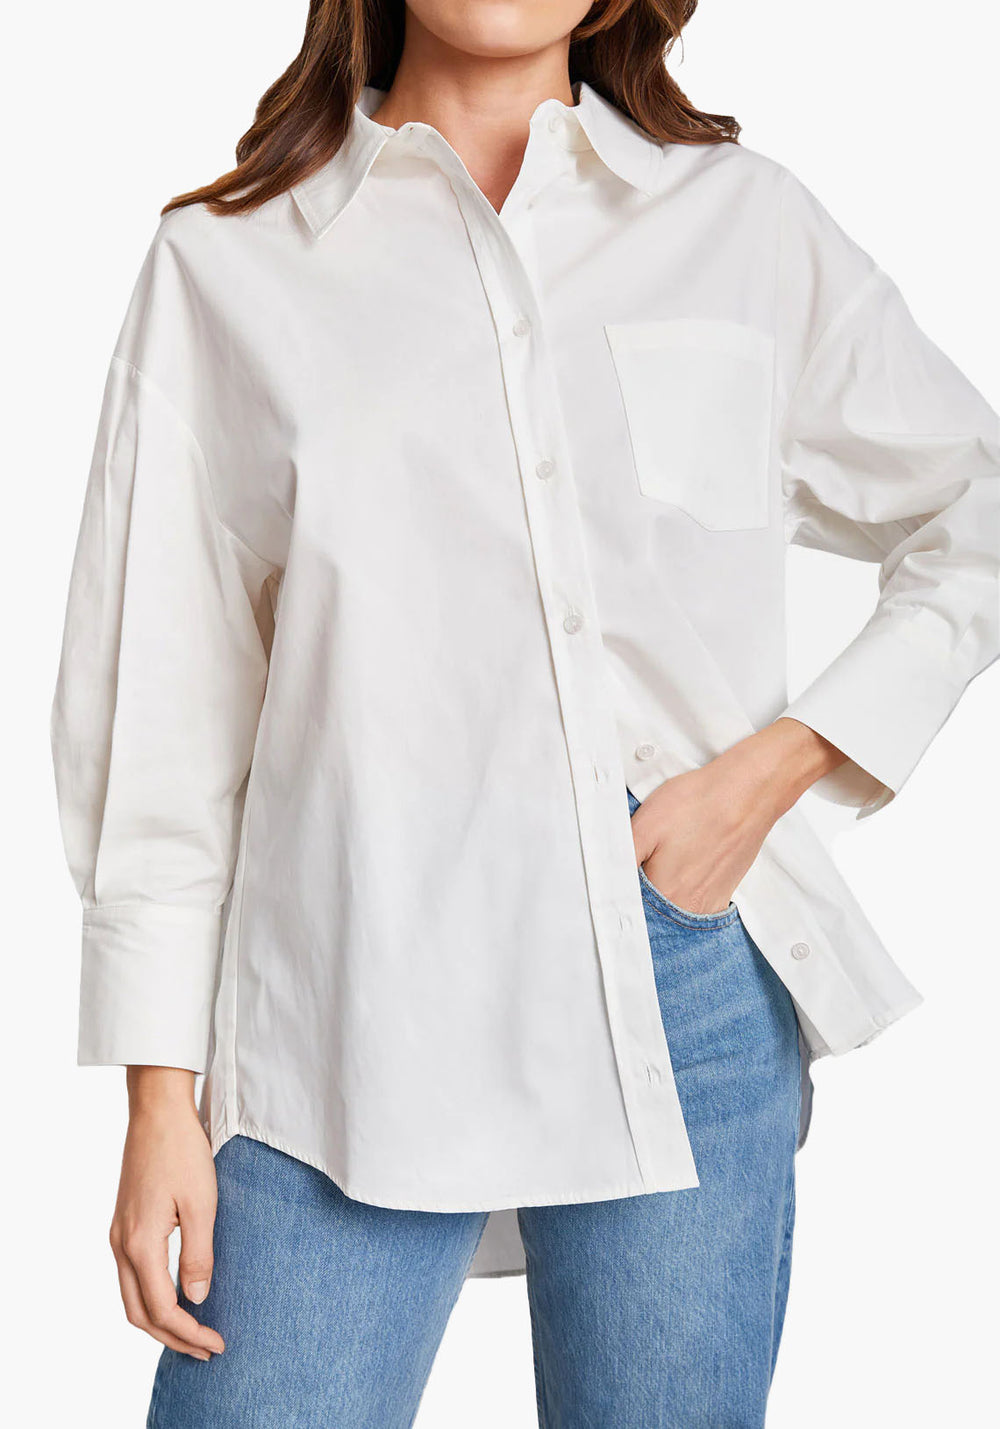 Anine Bing Mika Shirt - White And Lavender Stripe - ShopStyle Tops